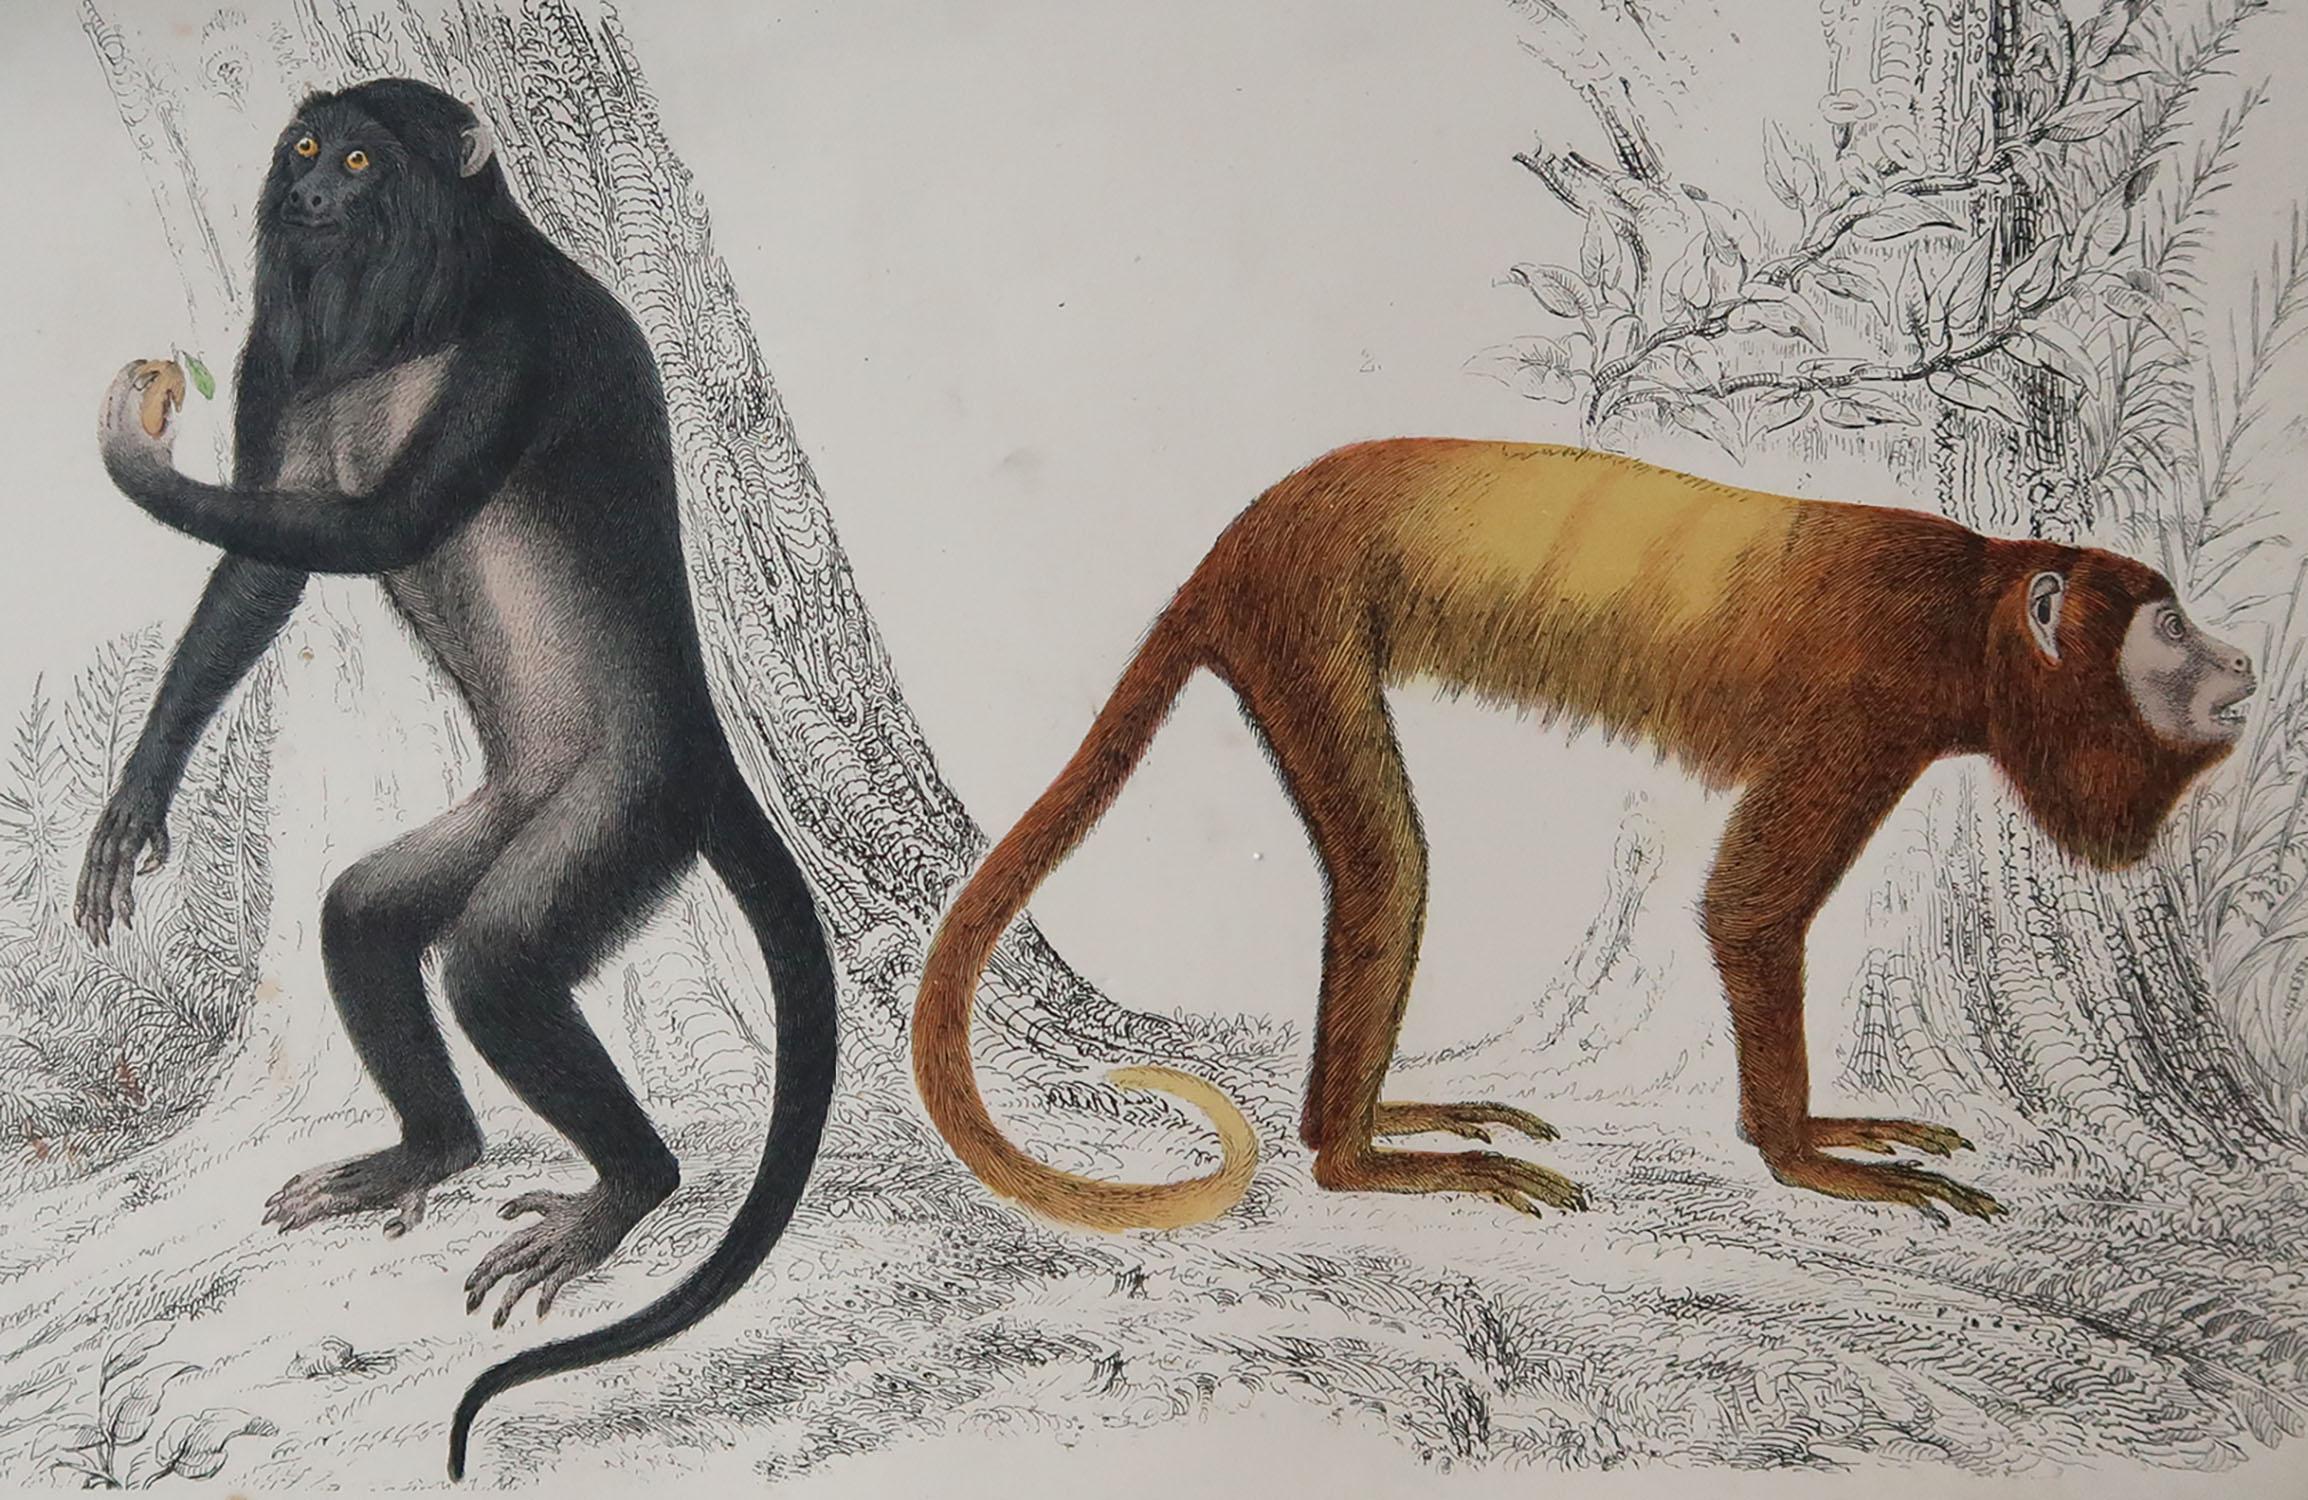 Great image of monkeys.

Unframed. It gives you the option of perhaps making a set up using your own choice of frames.

Lithograph after Cpt. Brown with original hand color.

Published, 1847.

Repair to a minor edge tear on top edge

Free